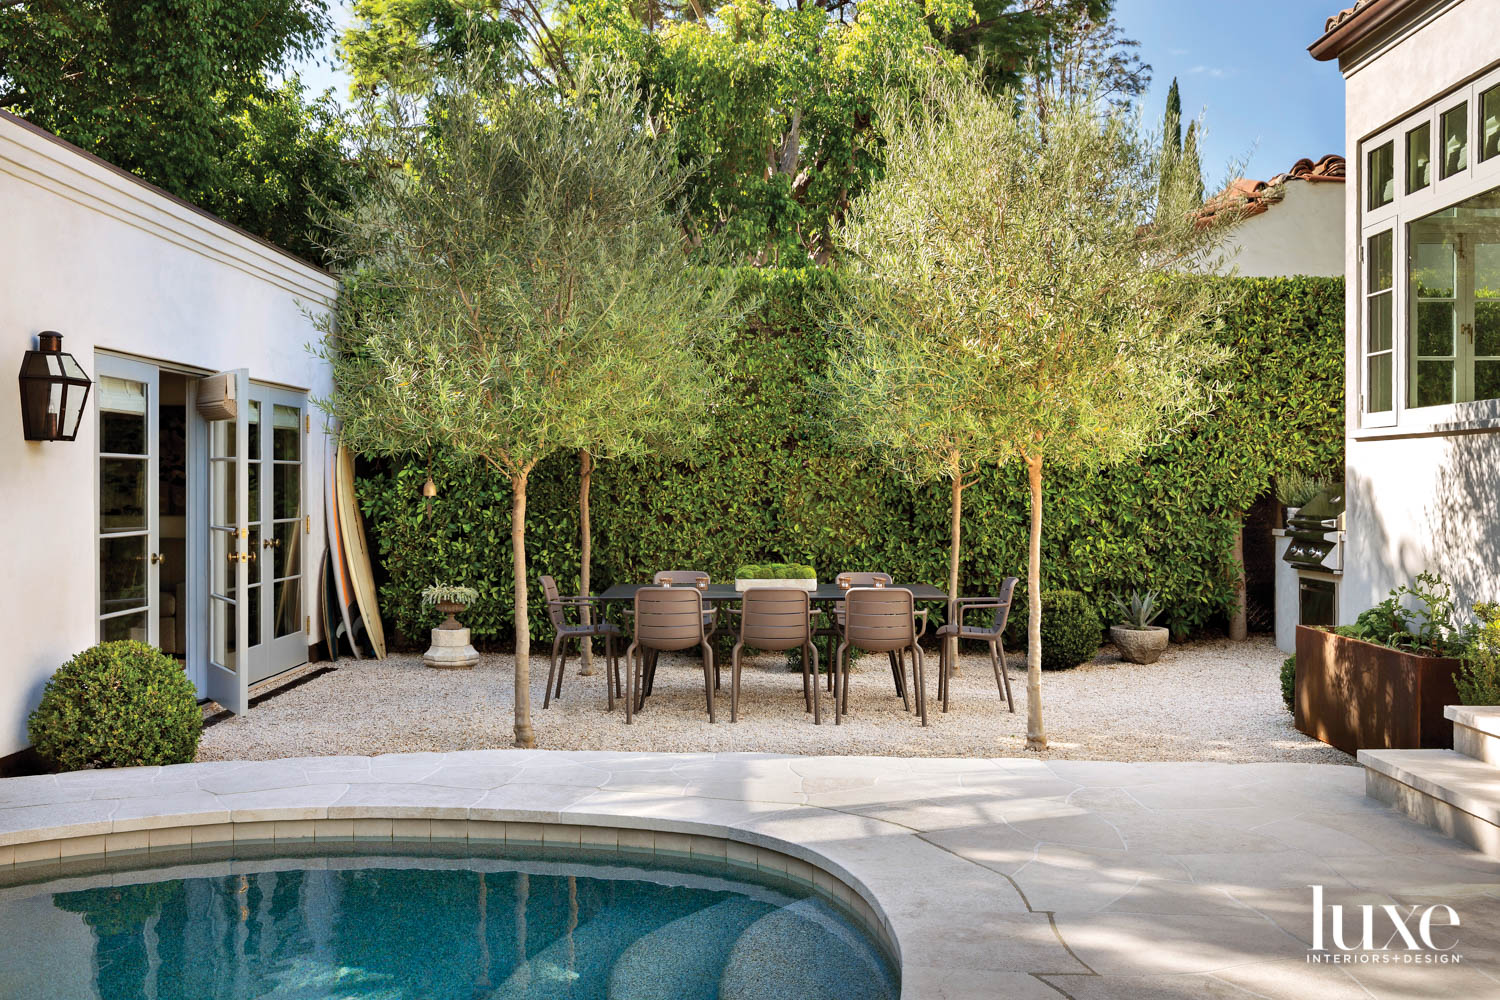 Garden featuring a pool, dinging table, chairs and olives trees